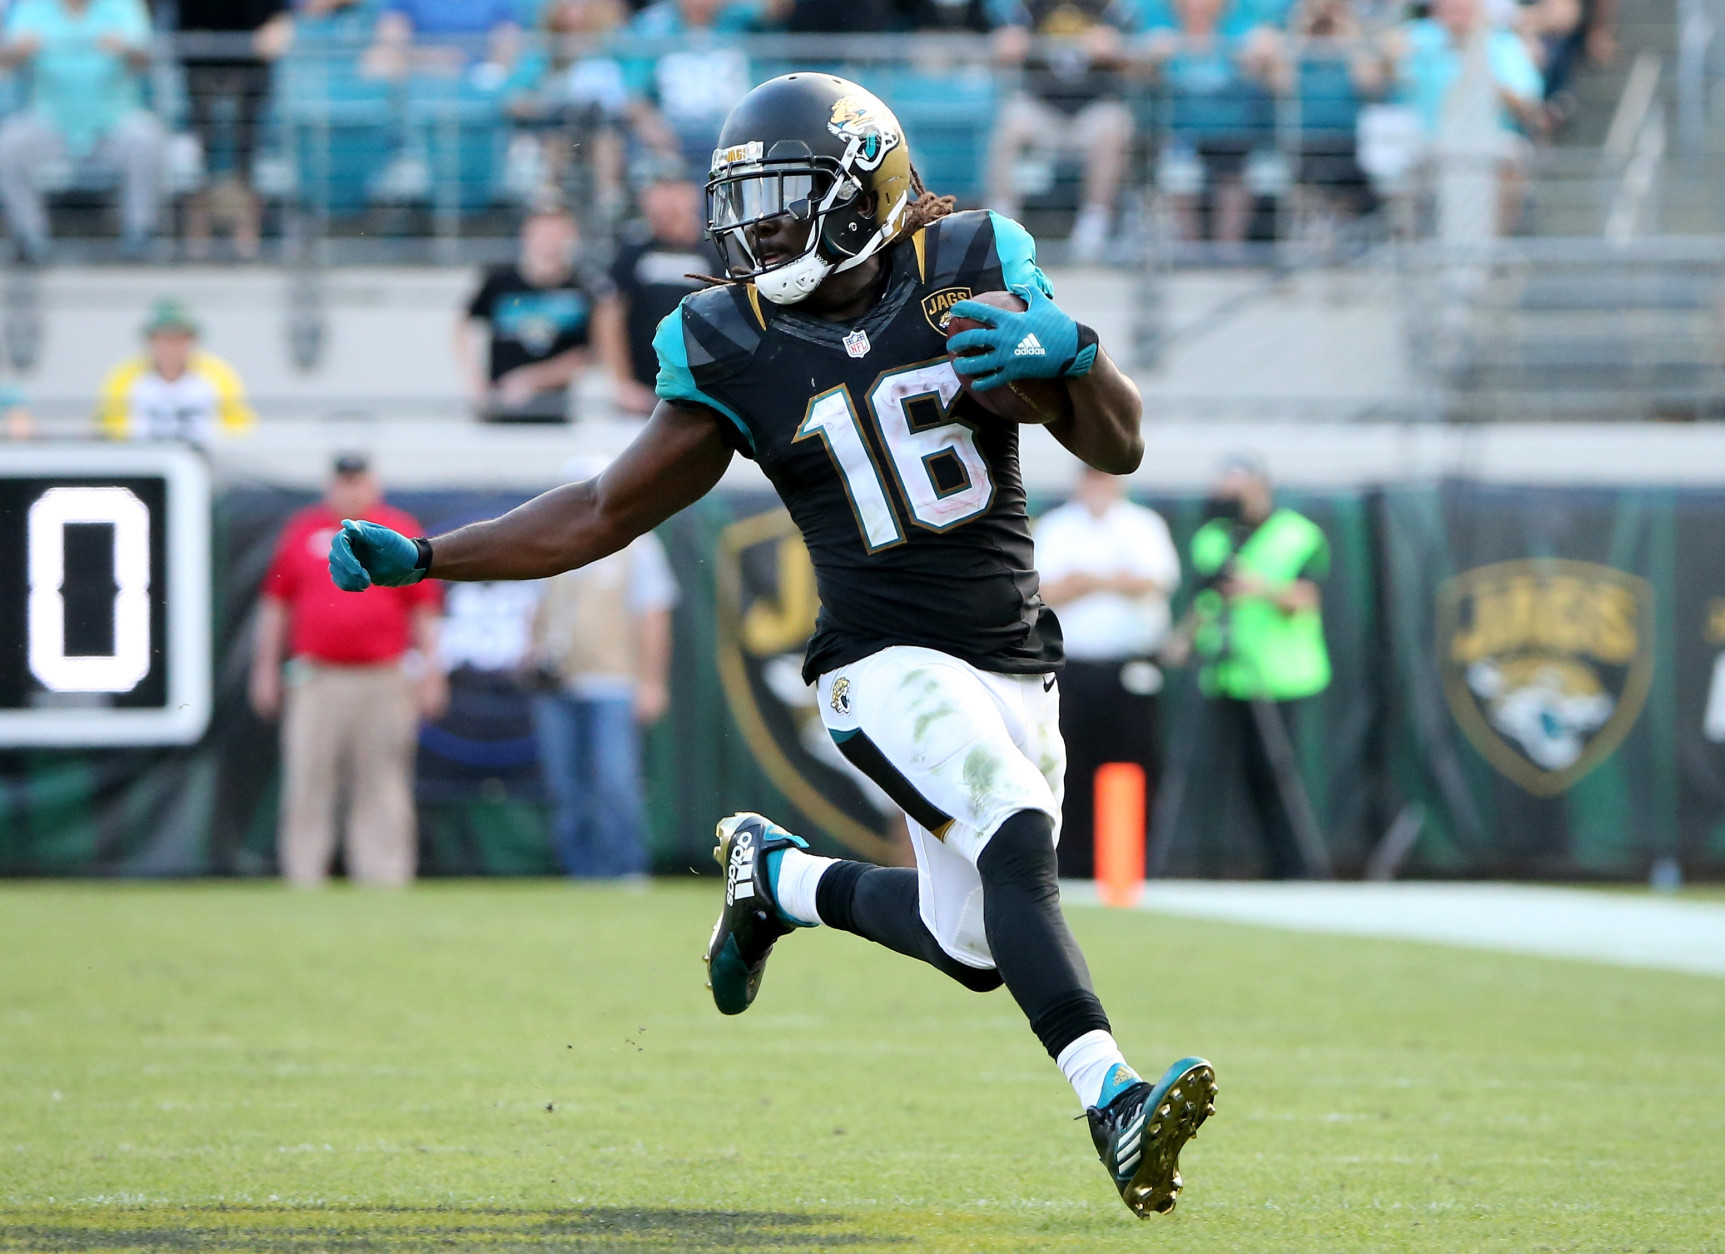 JACKSONVILLE, FL - DECEMBER 13:   Denard Robinson #16 of the Jacksonville Jaguars runs for yardage during the game against the Indianapolis Colts at EverBank Field on December 13, 2015 in Jacksonville, Florida.  (Photo by Sam Greenwood/Getty Images)